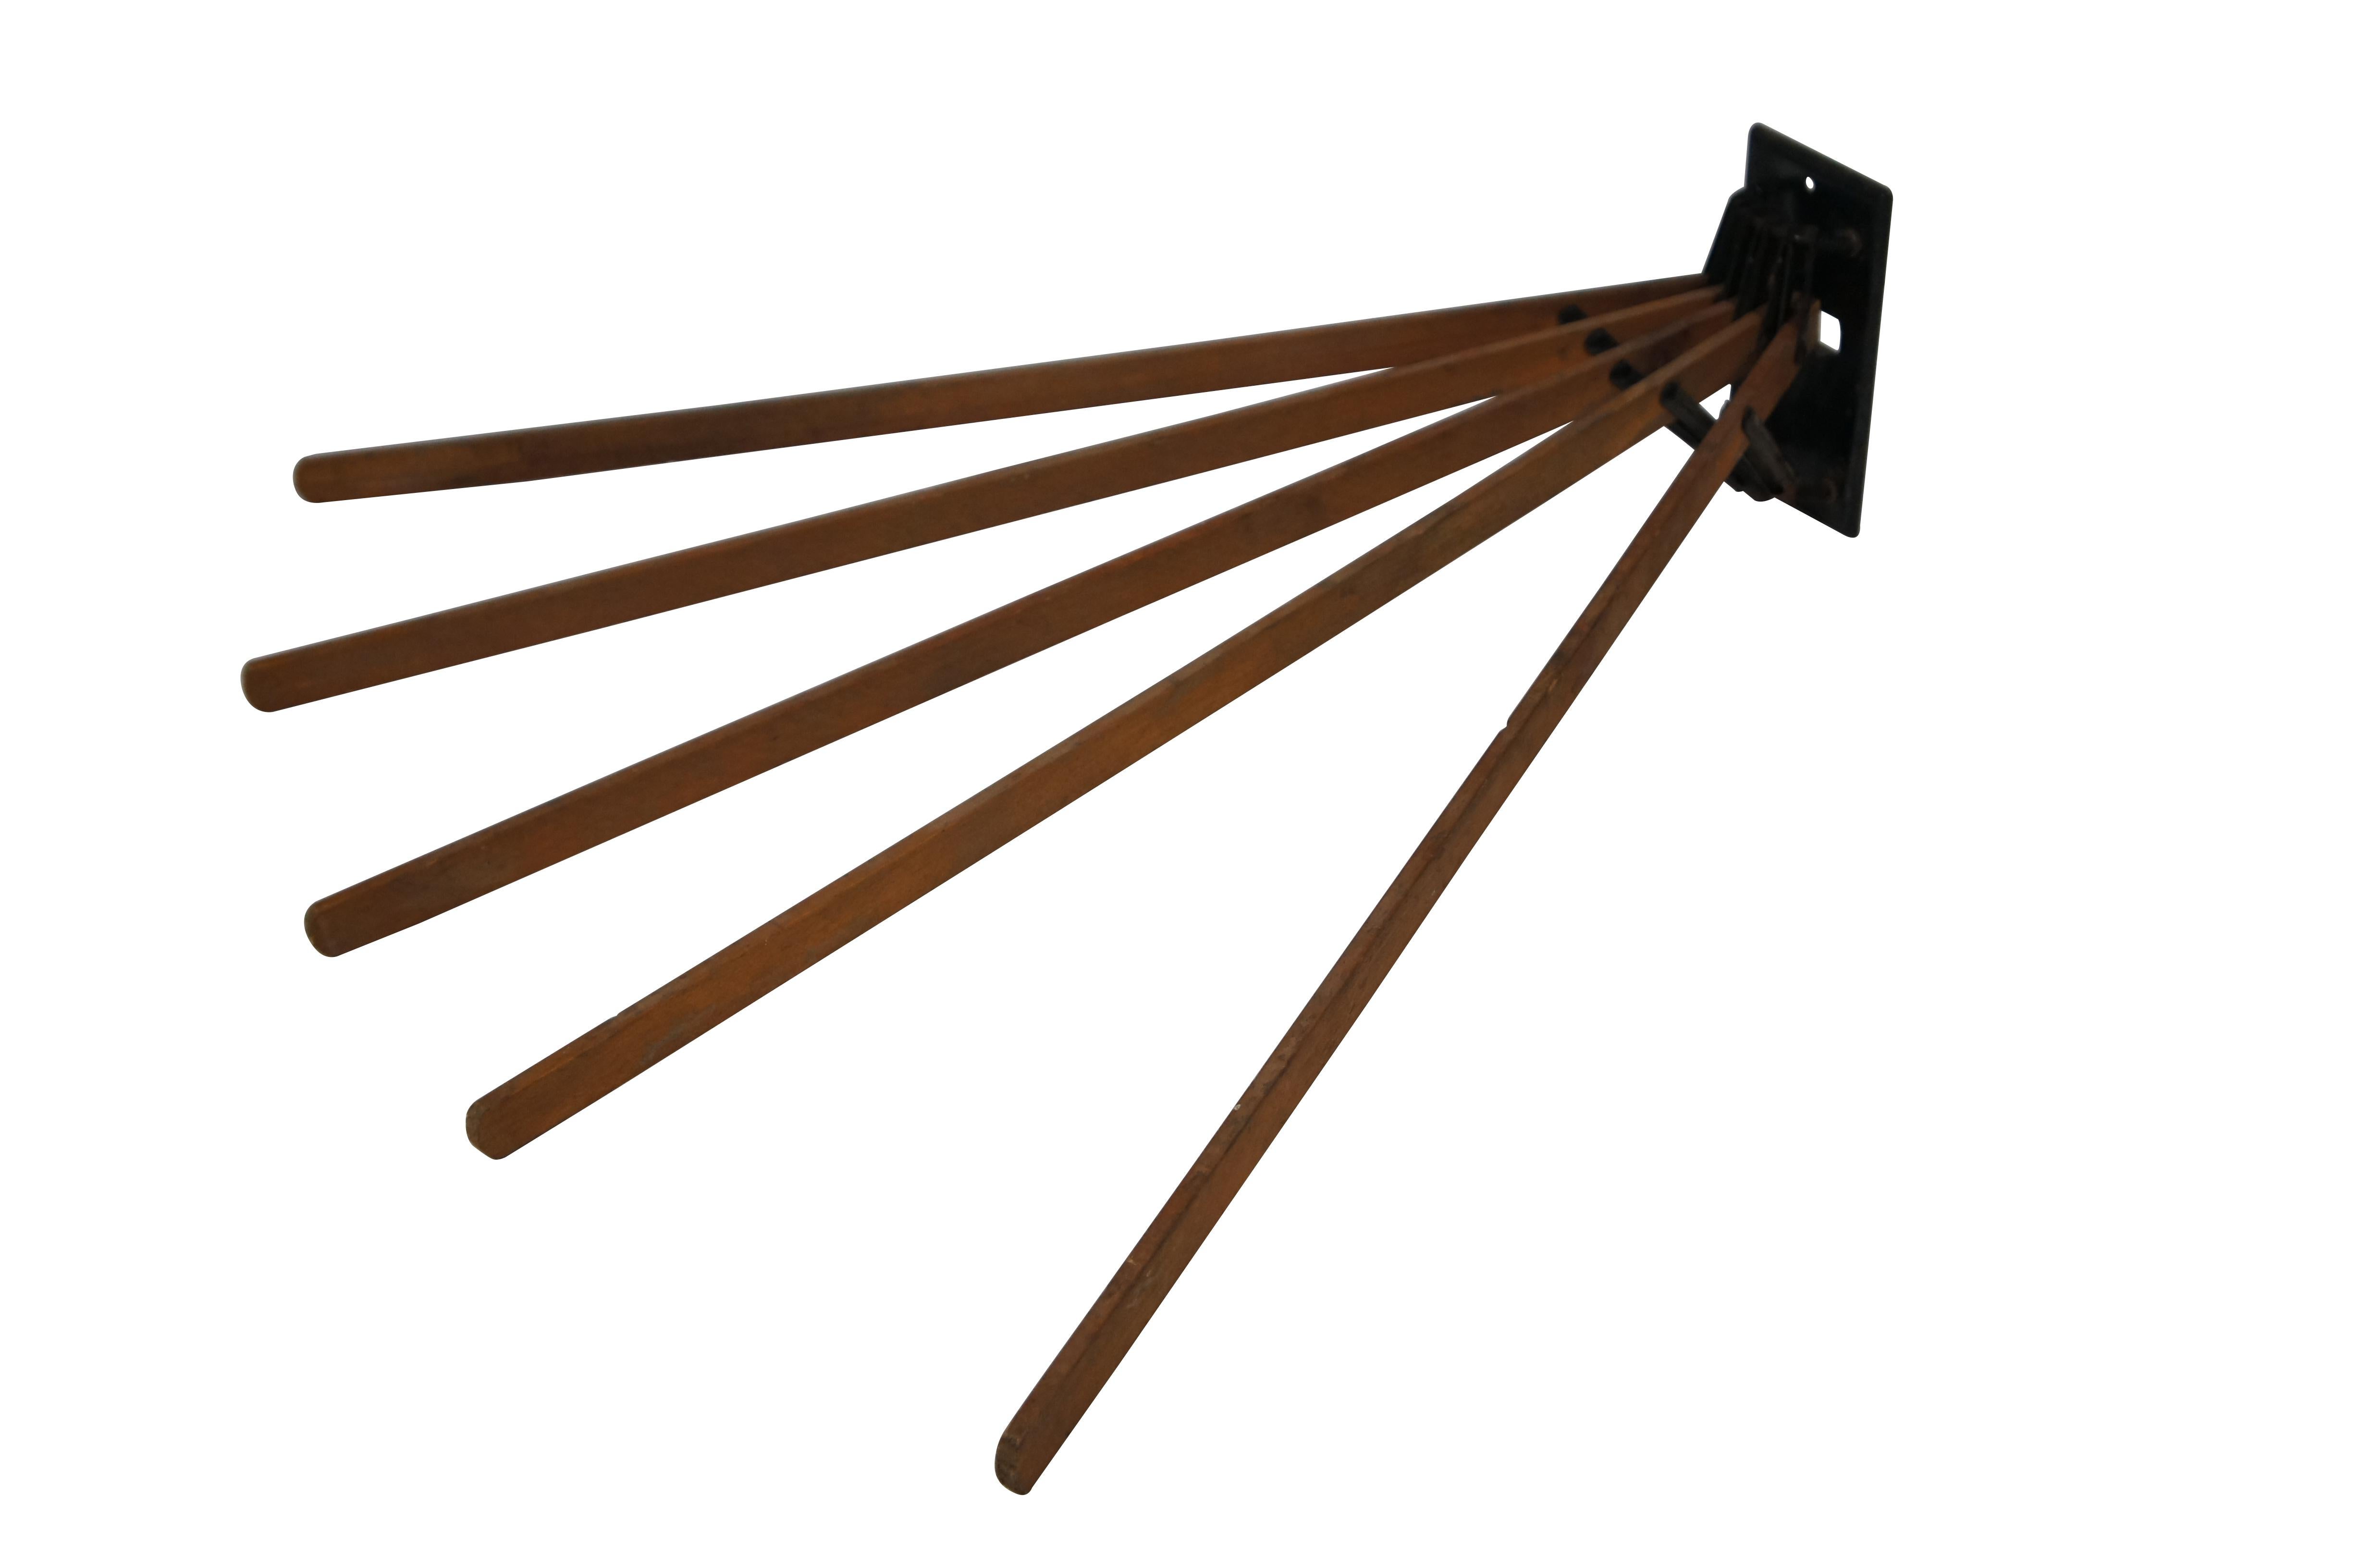 Antique wall mounted drying rack featuring black metal hardware and five wooden arms that extend out in a fan shape or can be folded neatly against the wall via spring action mechanism.

Dimensions:
Measured Open - 24